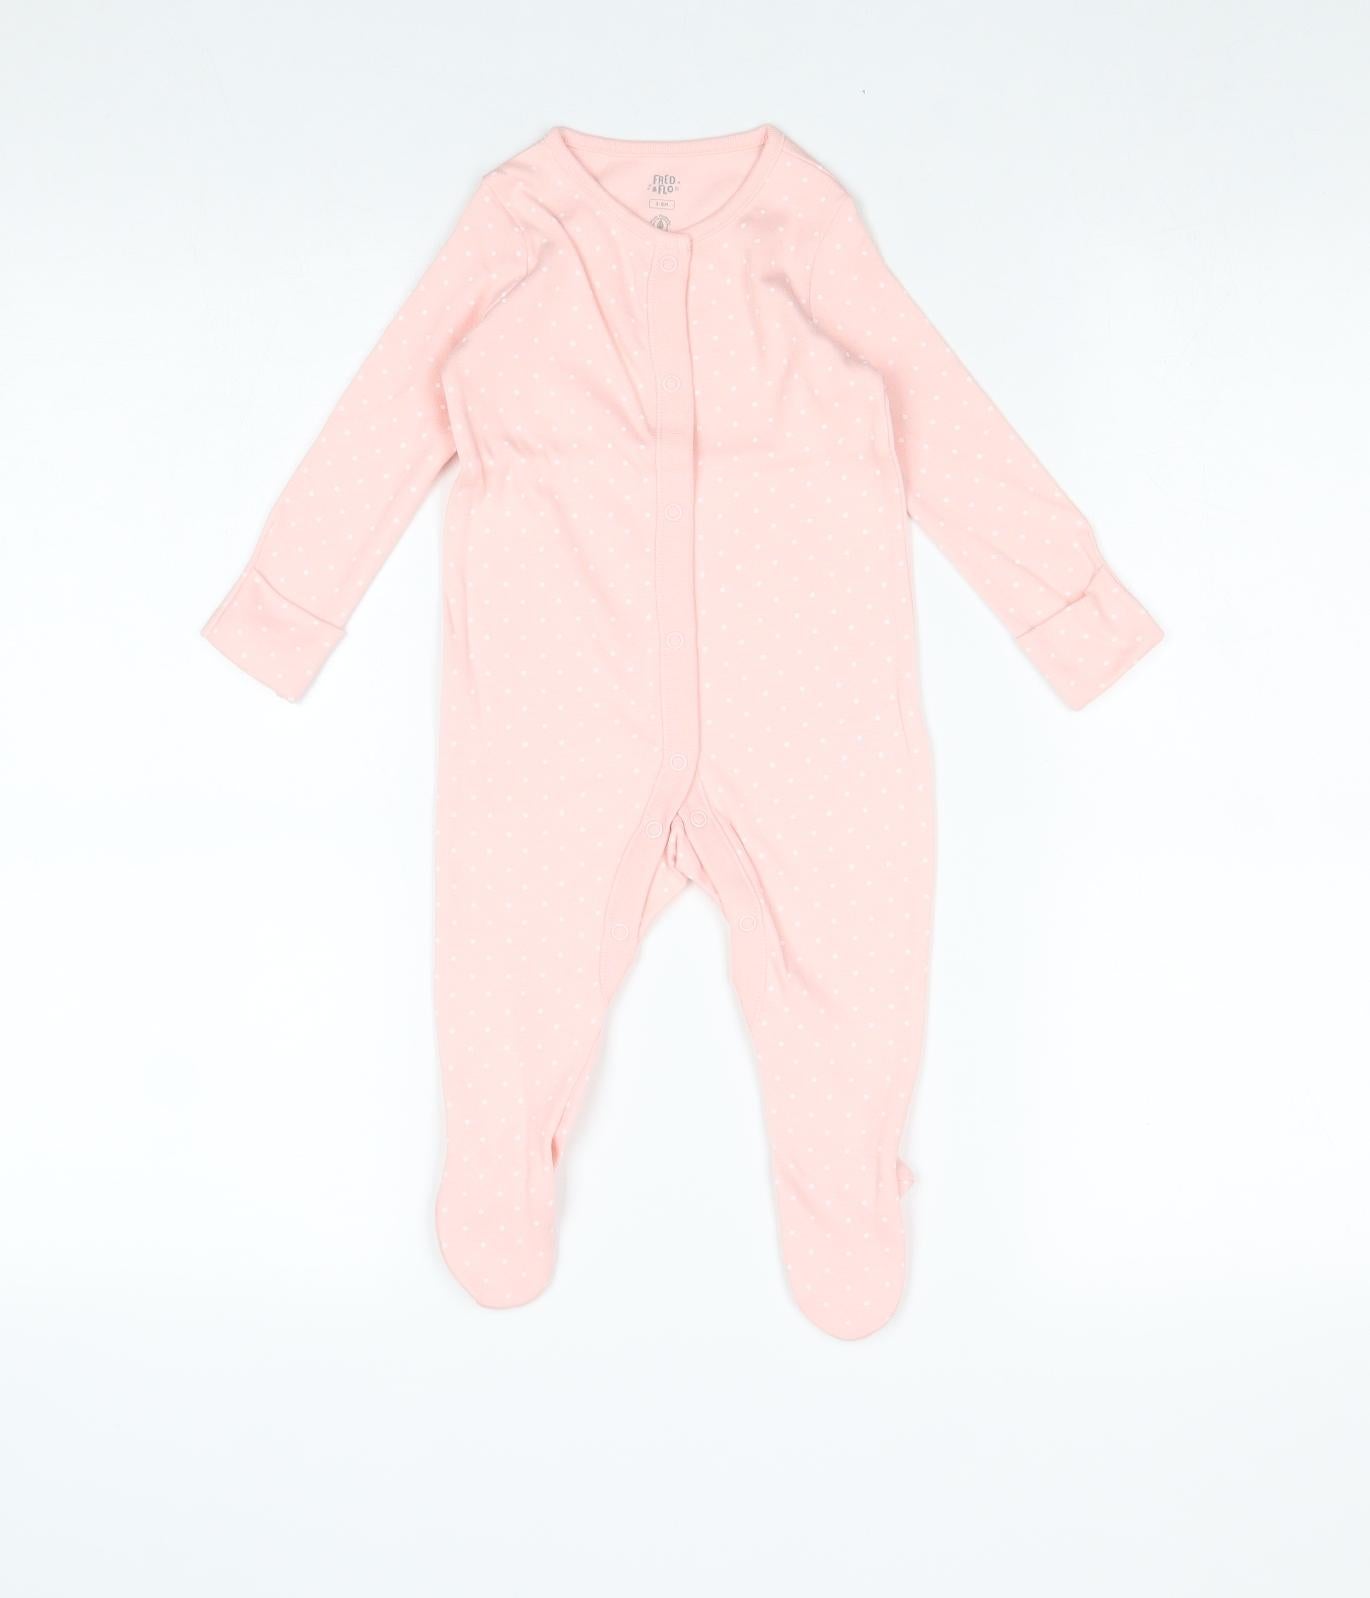 Fred & Flo Girls Pink Polka Dot 100% Cotton Babygrow One-Piece Size 3-6 Months Snap - Sleepsuit